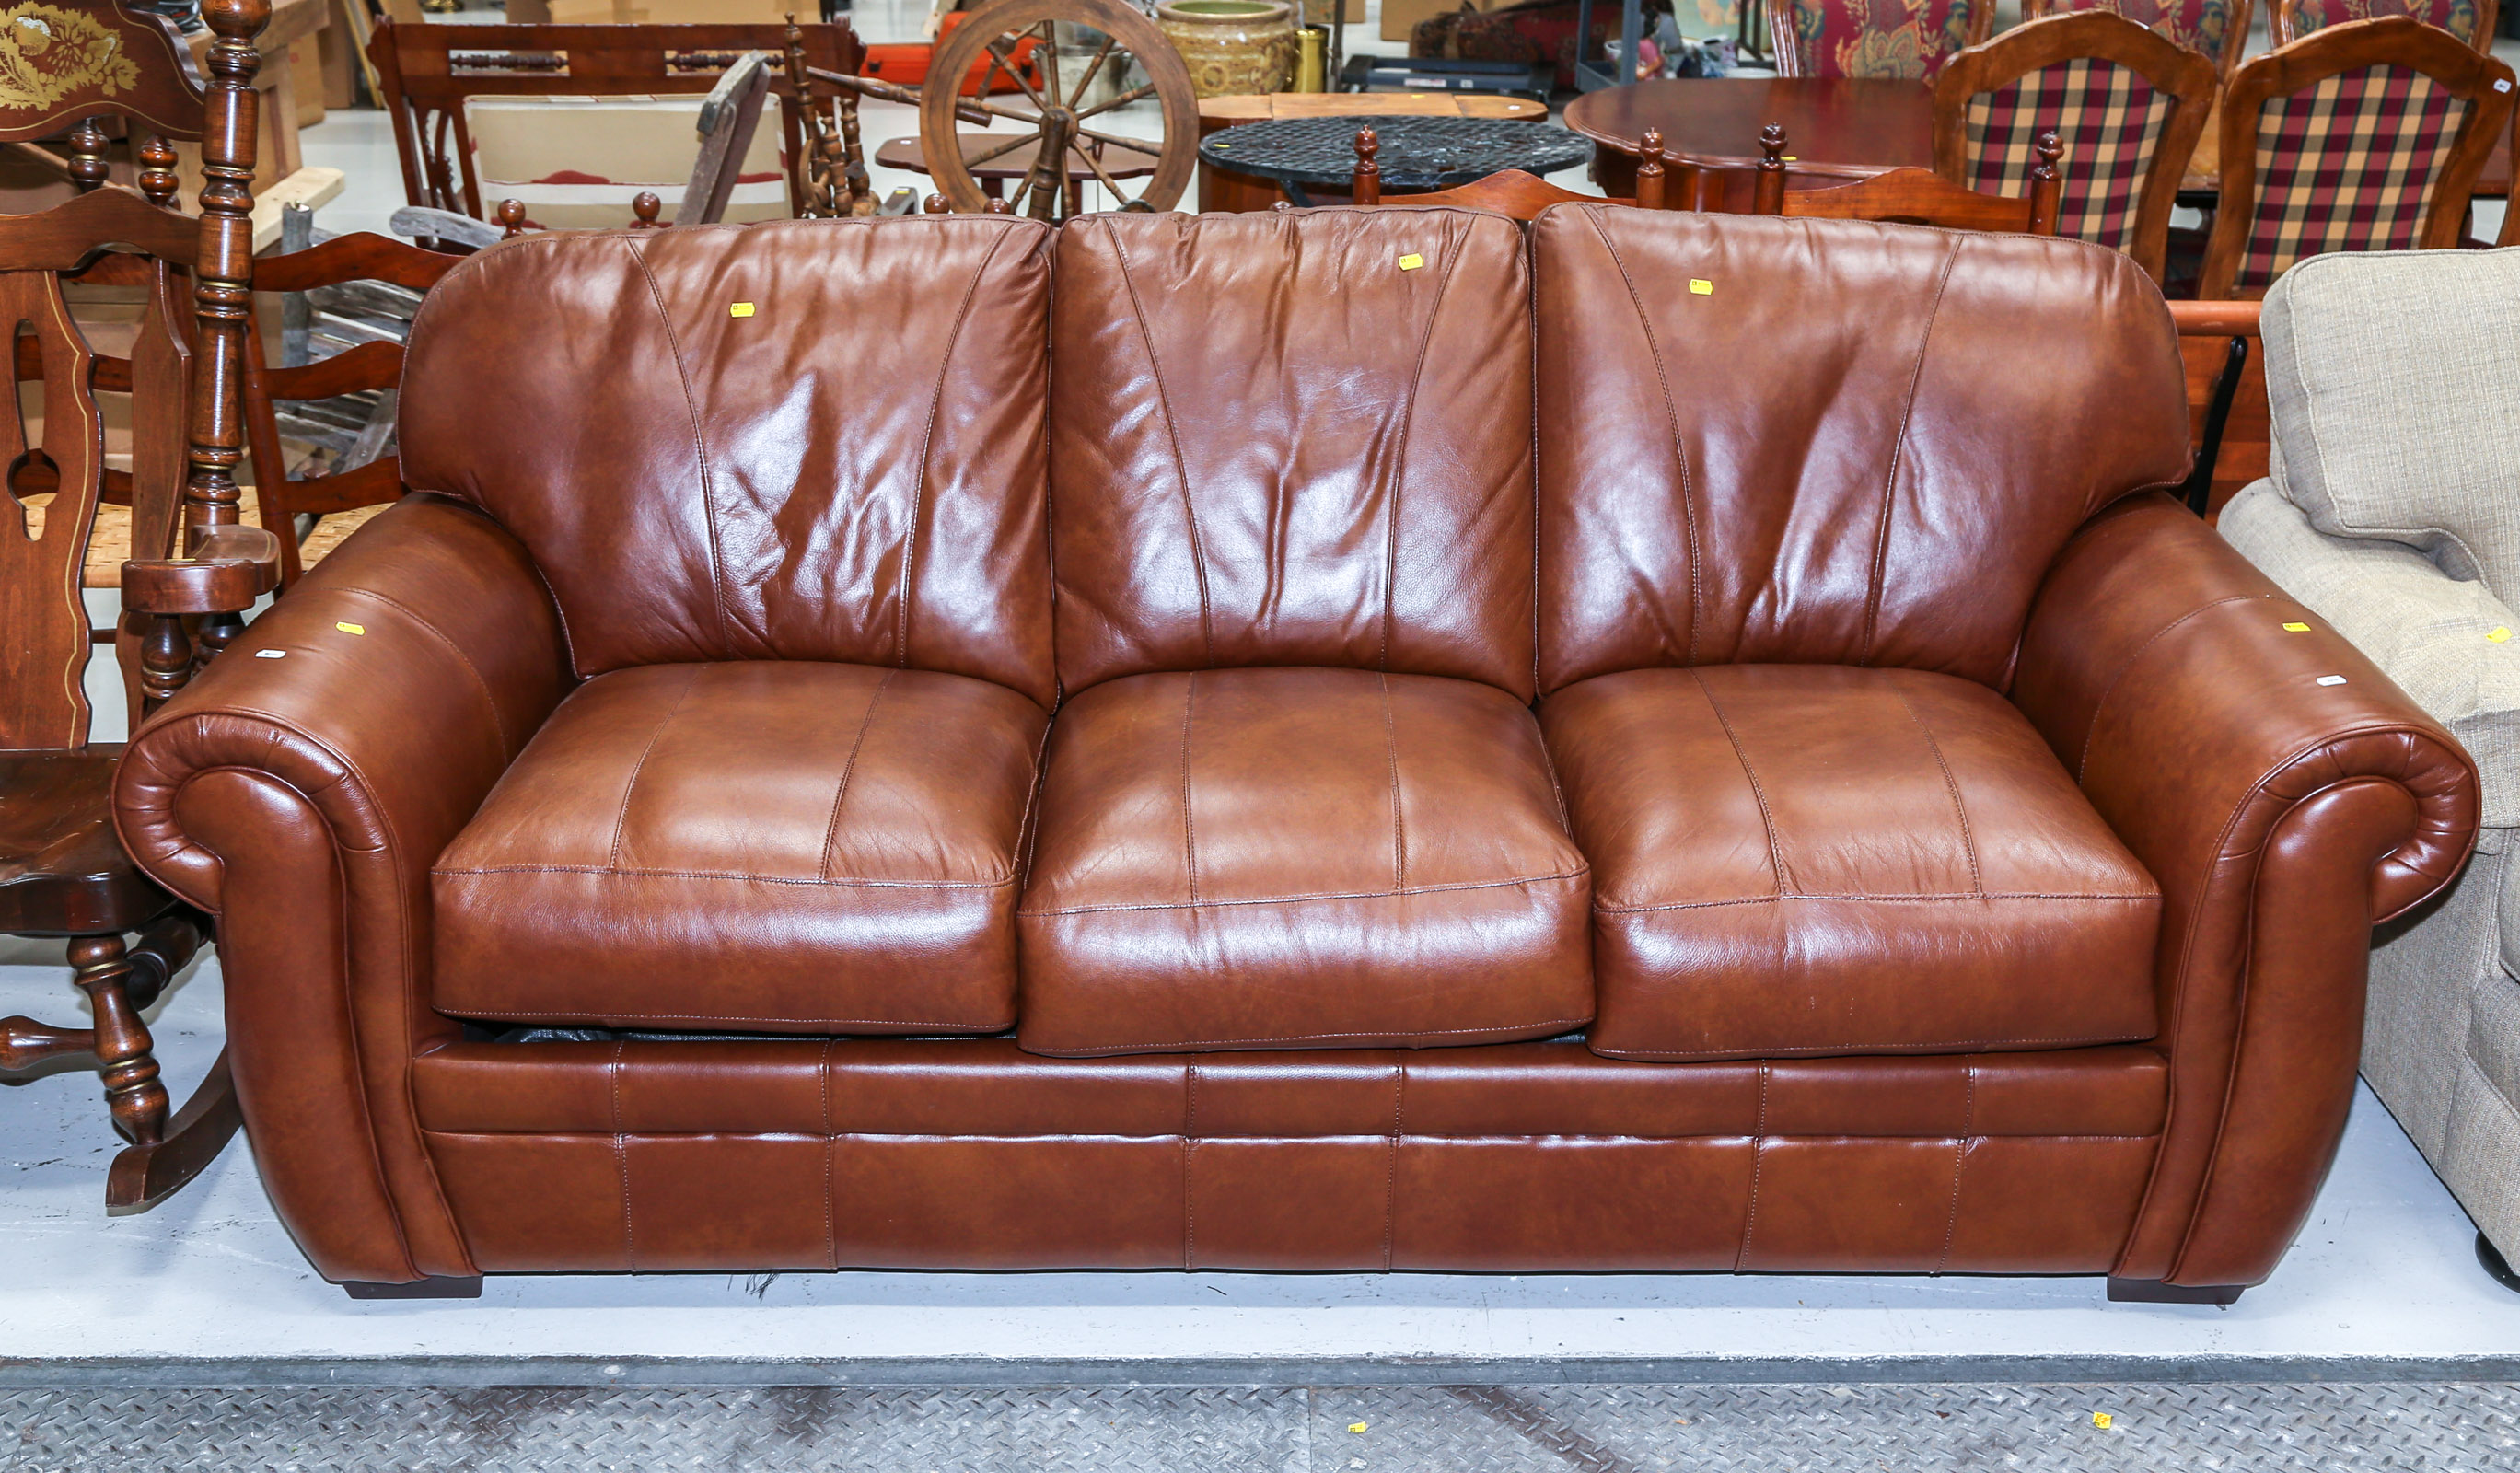 CONTEMPORARY STYLE LEATHER SLEEPER 354a41